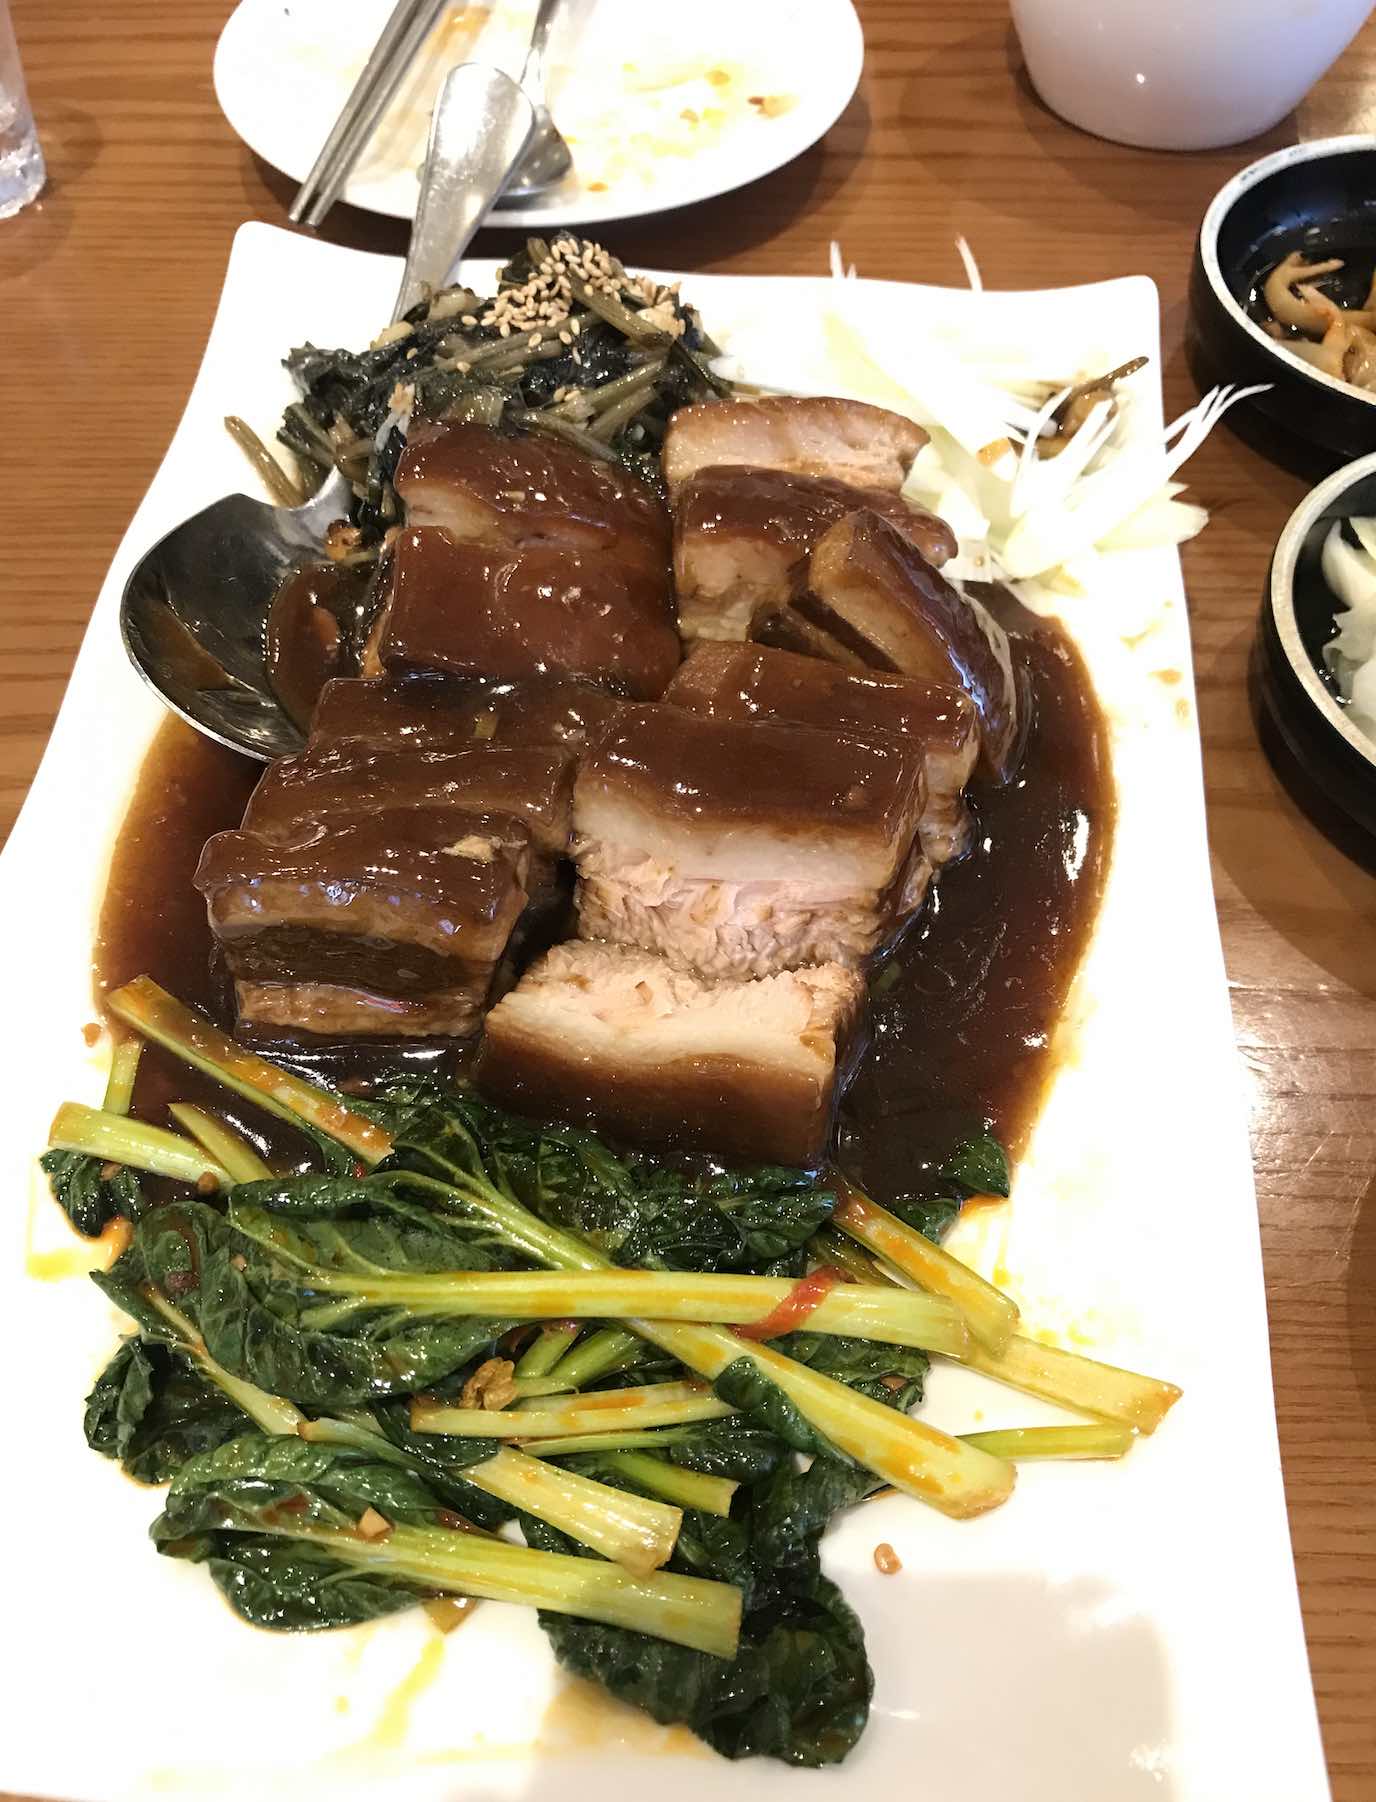 Chinese style pork belly dish in Korea